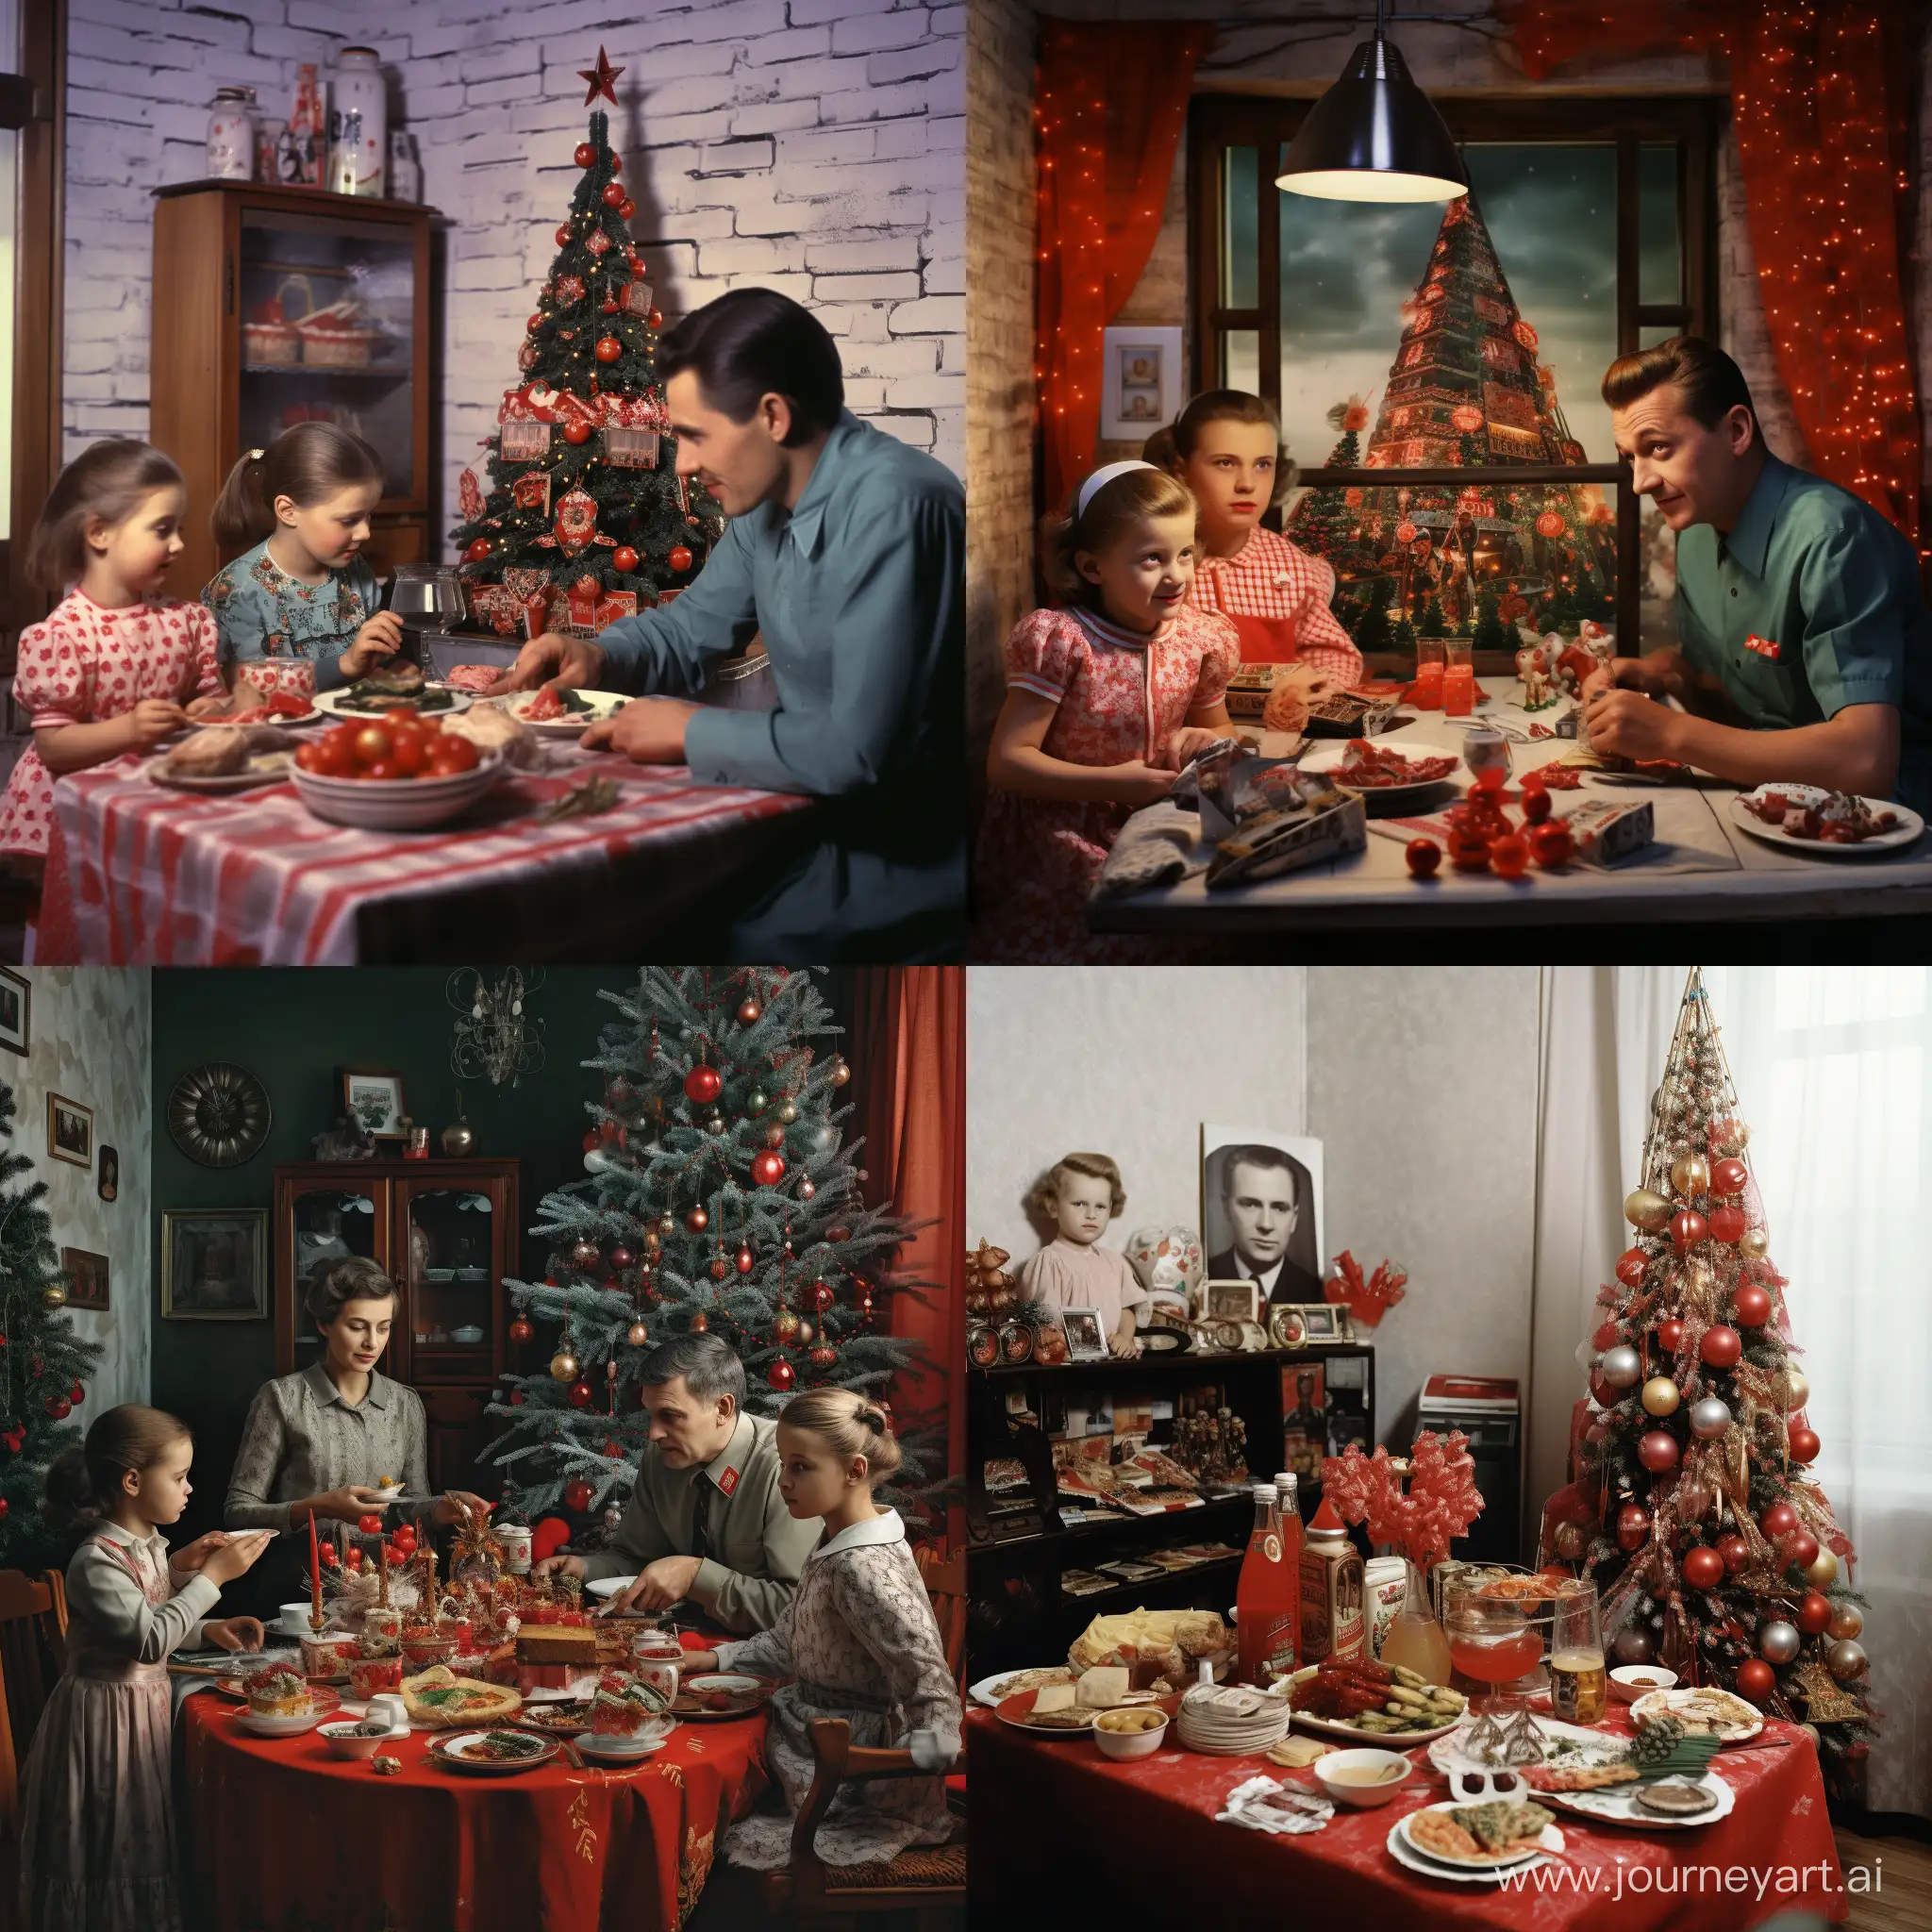 Soviet-New-Years-Family-Celebration-with-Festive-Table-and-Tree